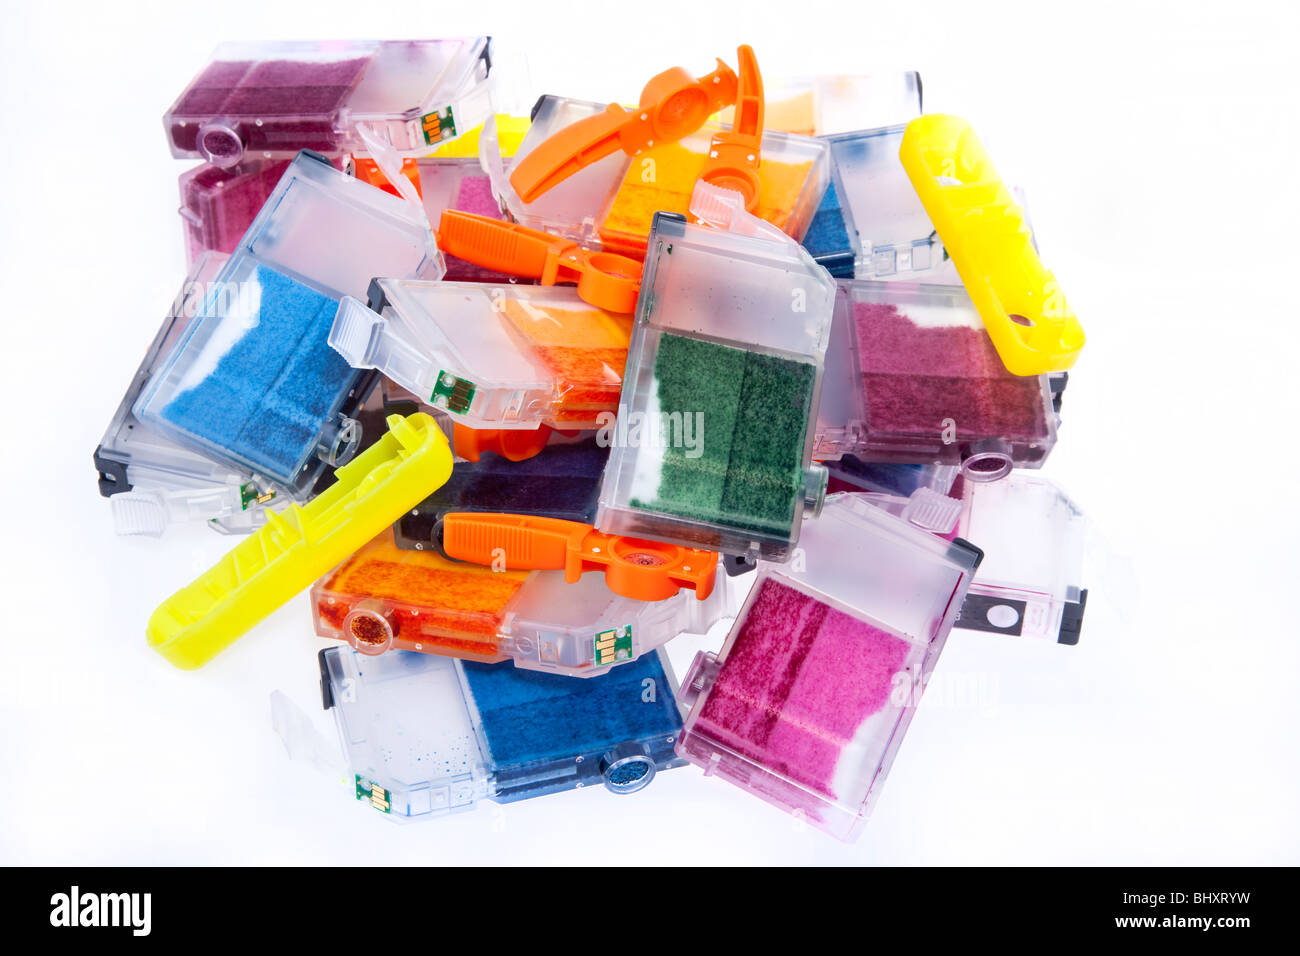 Colorful Ink Jet Printer Cartridges ready for recycling Stock Photo